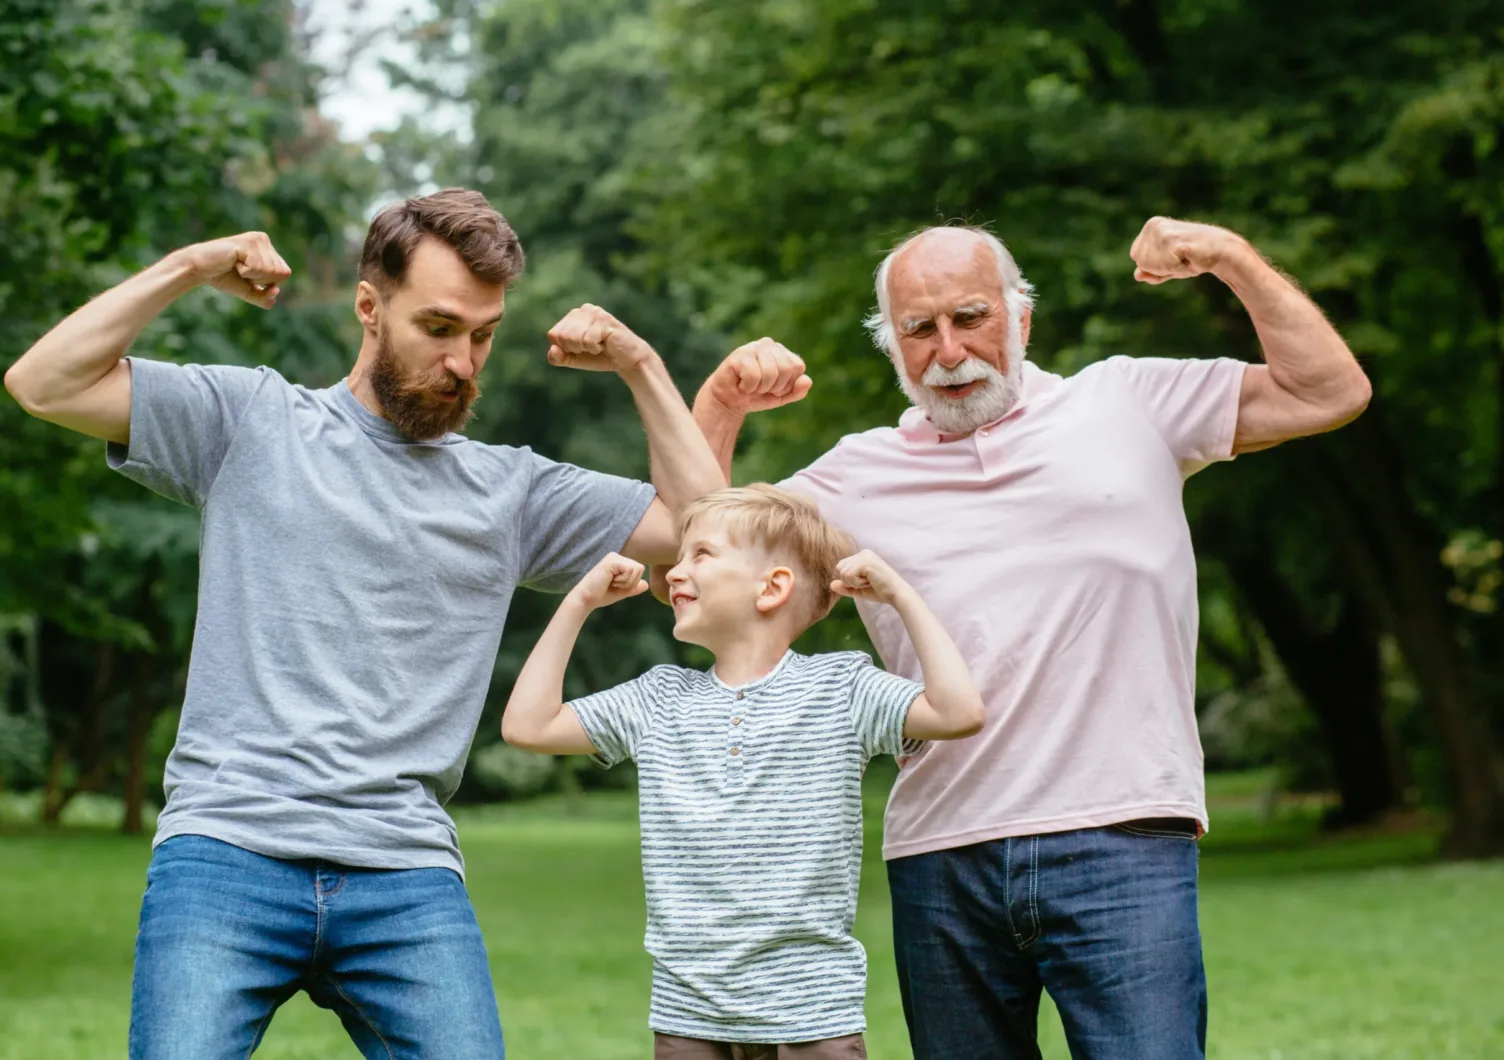 Three generations of Aylo Health patient's showing off their muscles in a park.